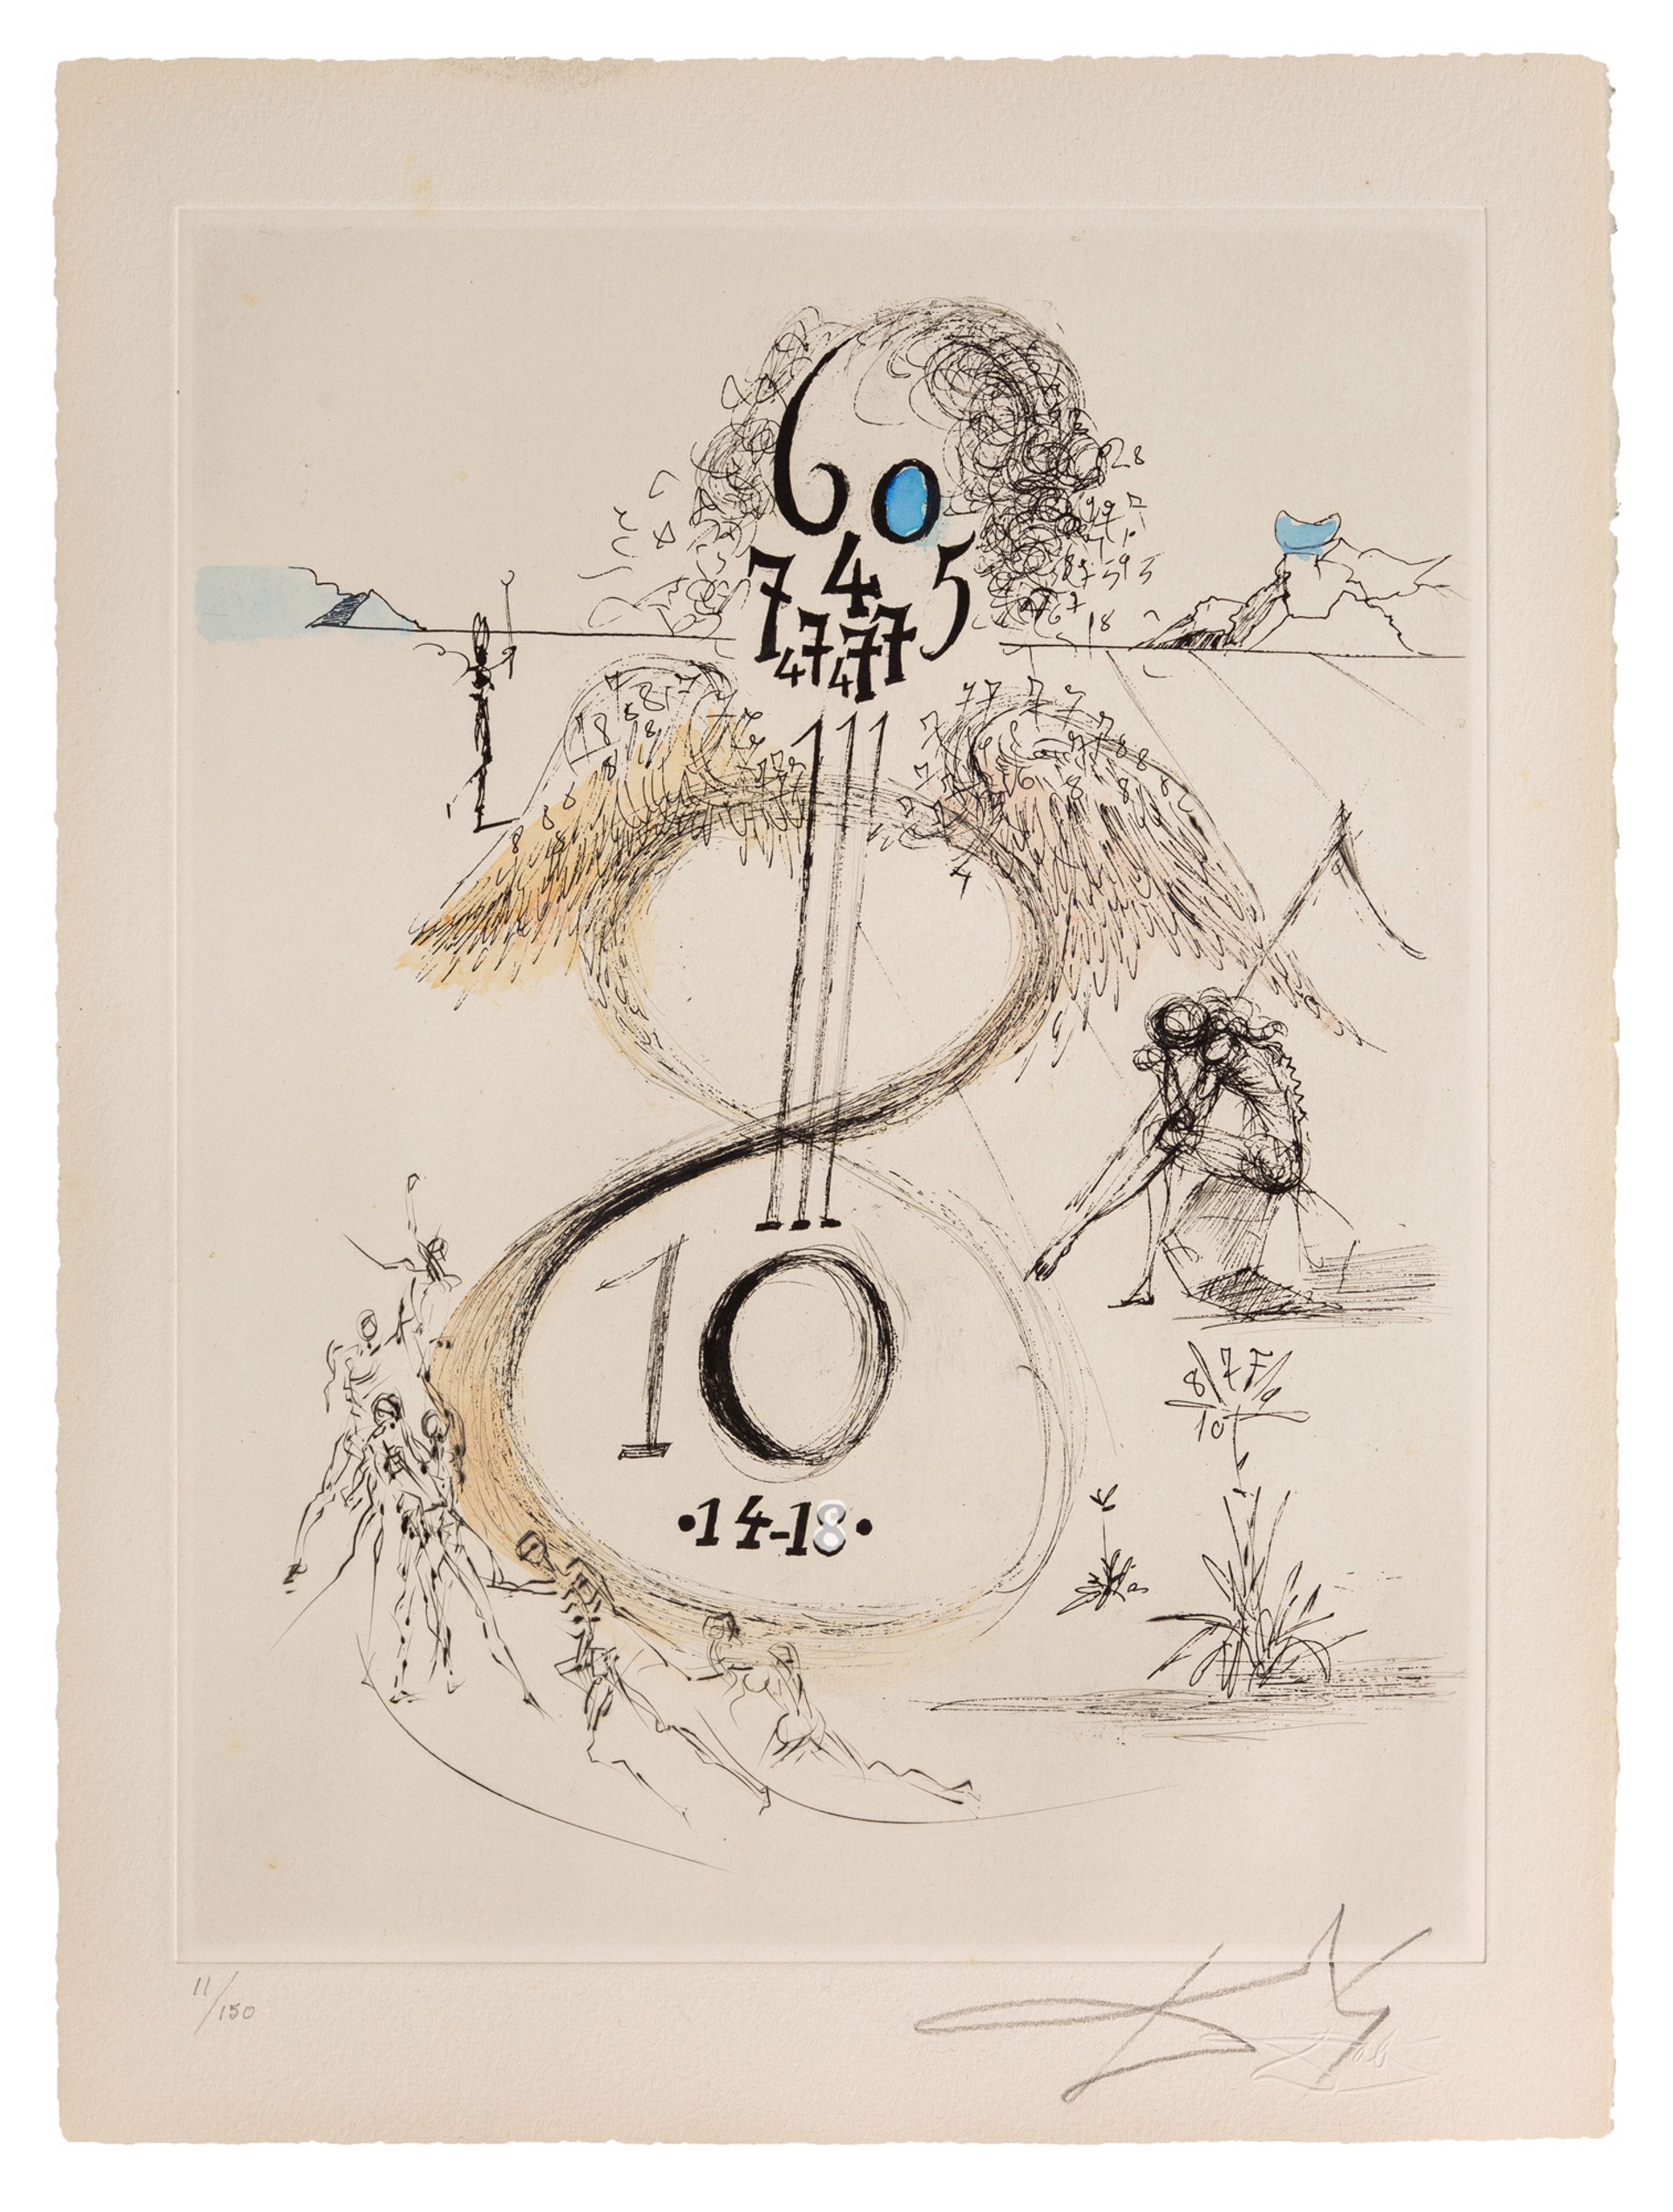 Apollinaire "The 1914-1918 War" by Salvador Dalí